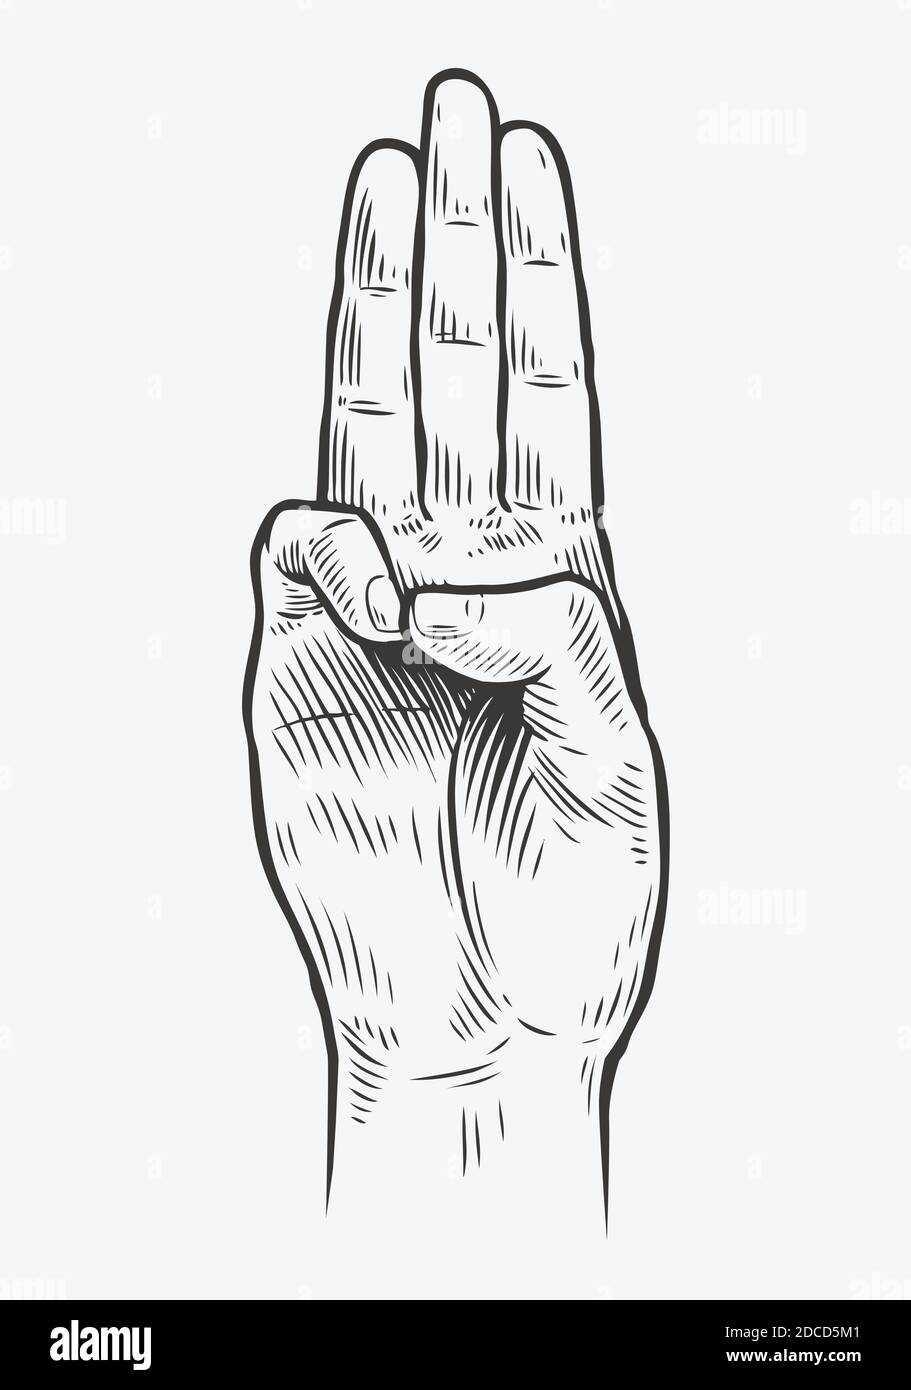 boy scout honor hand symbol